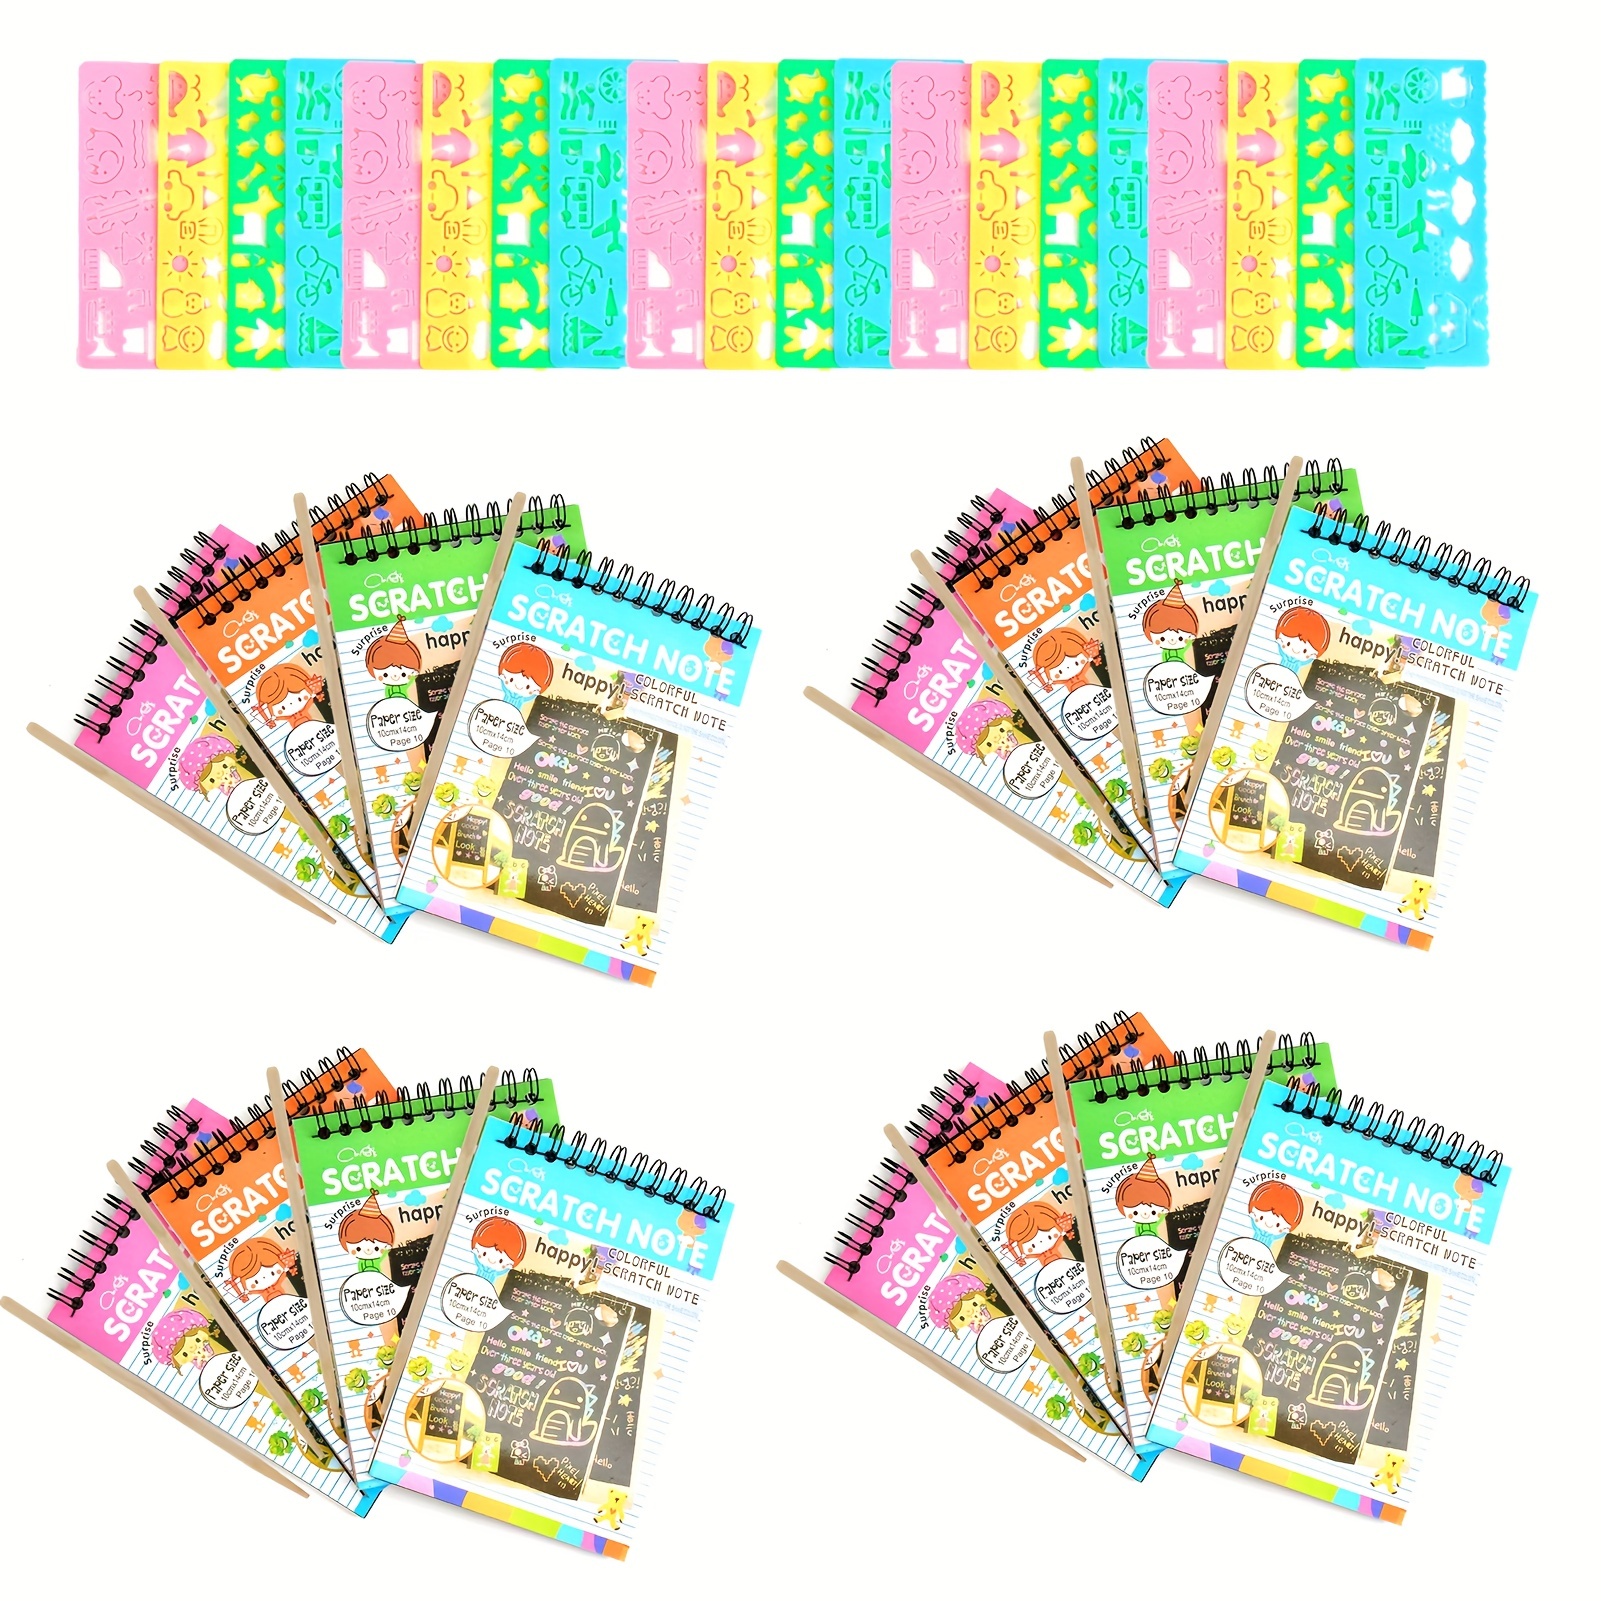  ZMLM Christmas Scratch Art Party Favors: 16 Pack Rainbow  Scratch Art Notebook Bulk Scratch Art for Kids Birthday Party Favors Girls  Boys Christmas Gifts Toy Scratch Pads Classroom Prizes : Toys